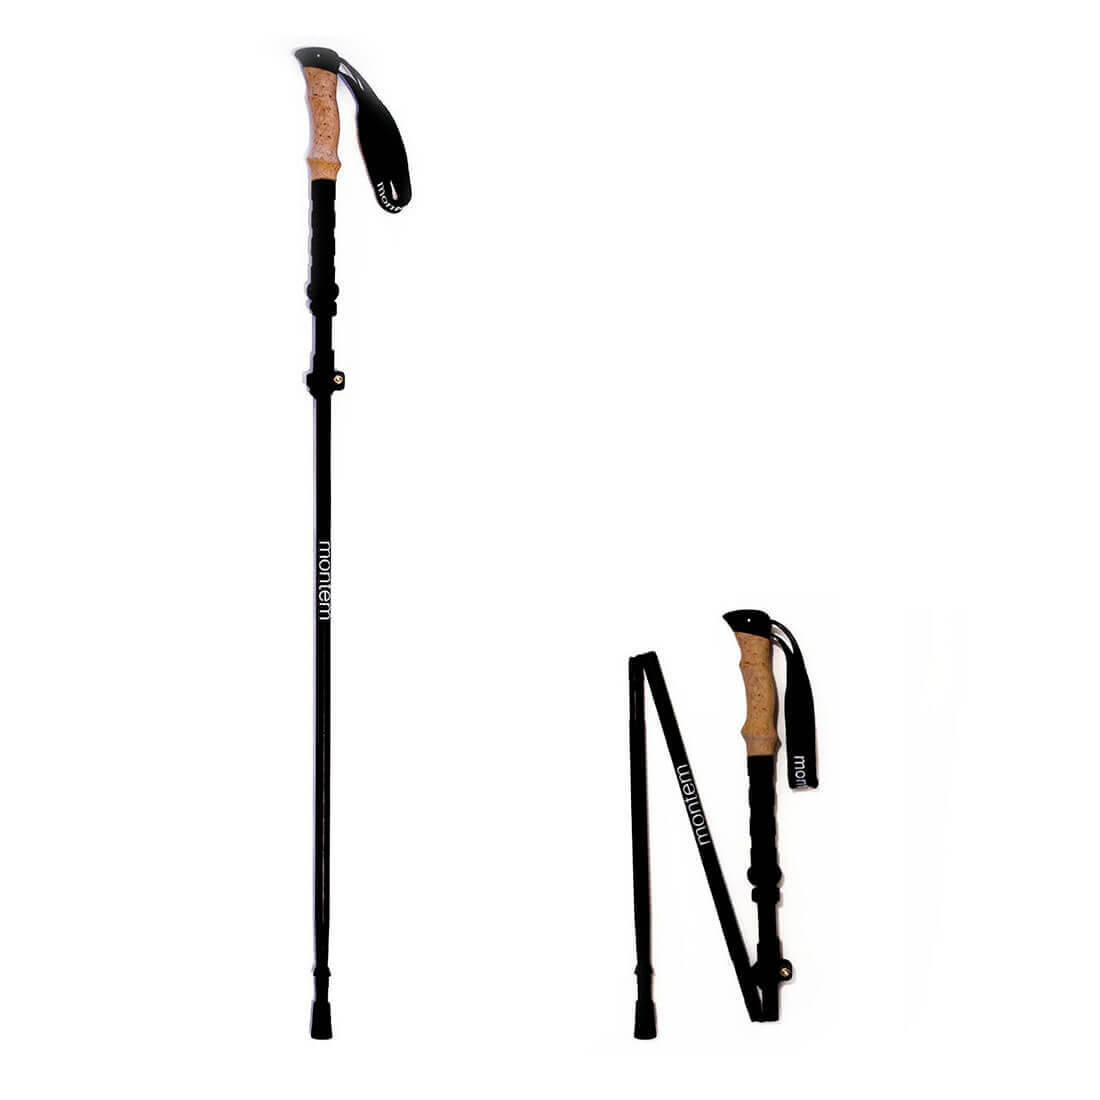 flintronic Collapsible Tri-fold Trekking Pole/Hiking Poles up to 54 inches  – Wetall